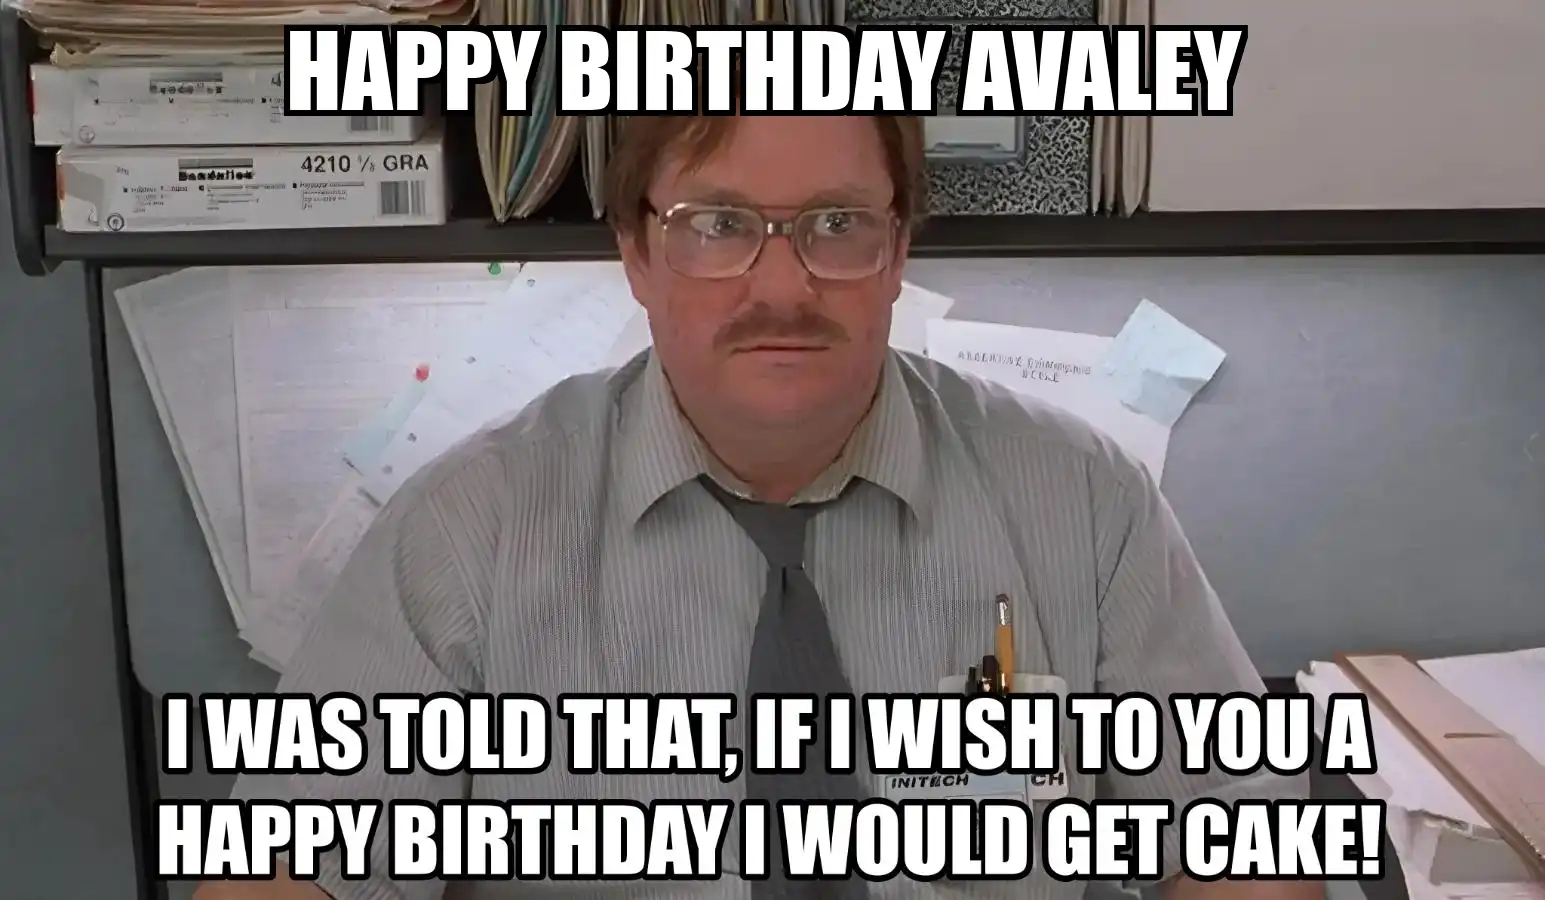 Happy Birthday Avaley I Would Get A Cake Meme